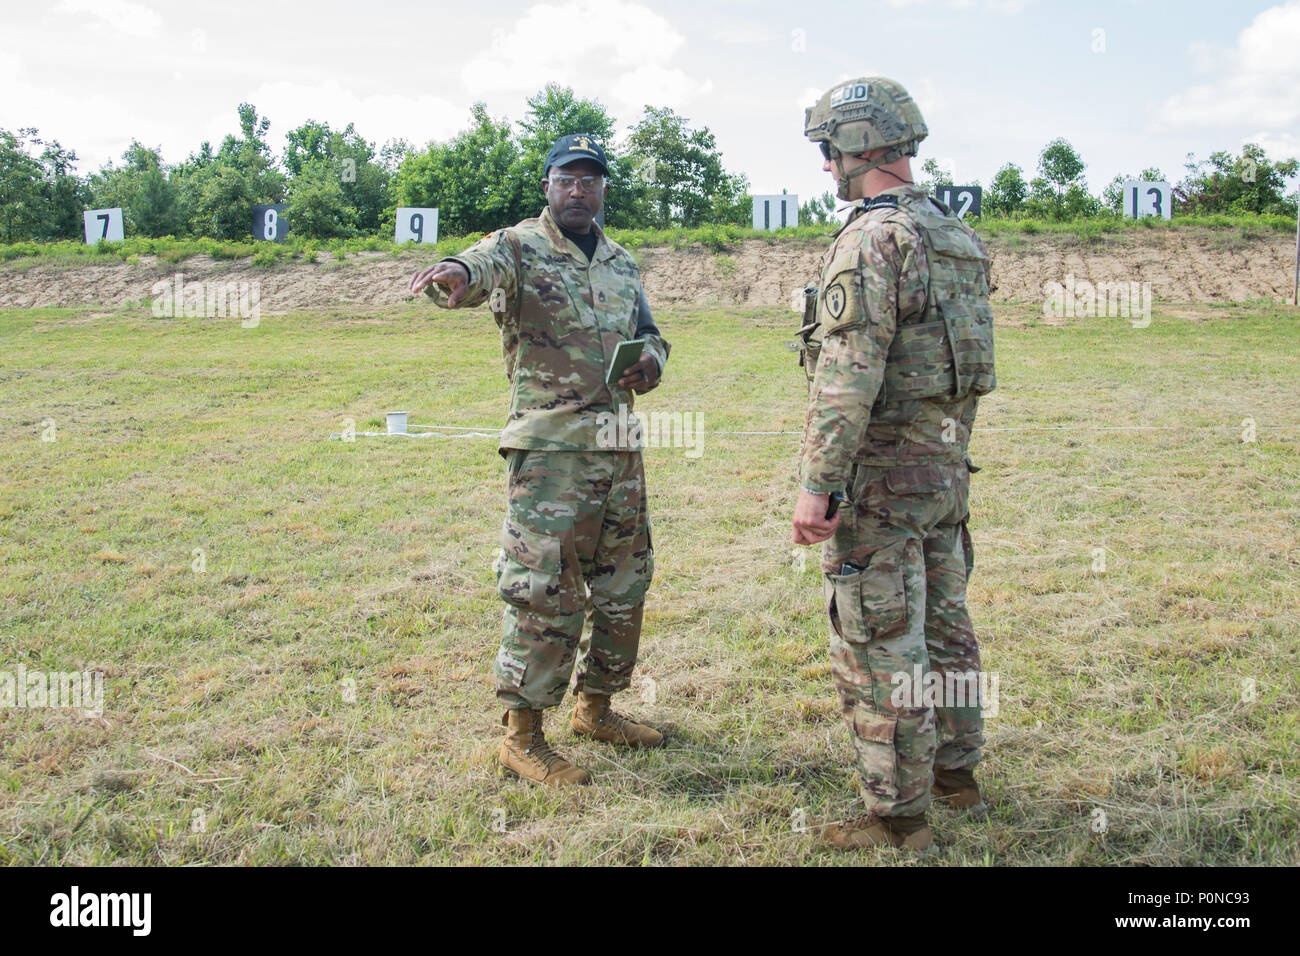 A range control cadre of the Ordnance Crusible 2018 briefs Spc. Barry Craig, an explosive ordnance disposal team member with the 704th Ordnance Company (EOD) from Fort Hood, Texas, during the barrier shoot on June 7, 2018. EOD teams are assessed on operations and associated tasks required to provide EOD support to unified land operations to eliminate and/or reduce explosive threats. The Ordnance Crucible is designed to test Soldiers’ teamwork and critical thinking skills as they apply technical solutions to real world problems improving readiness of the force. (U.S. Army photo by Spc. Shekinah Stock Photo